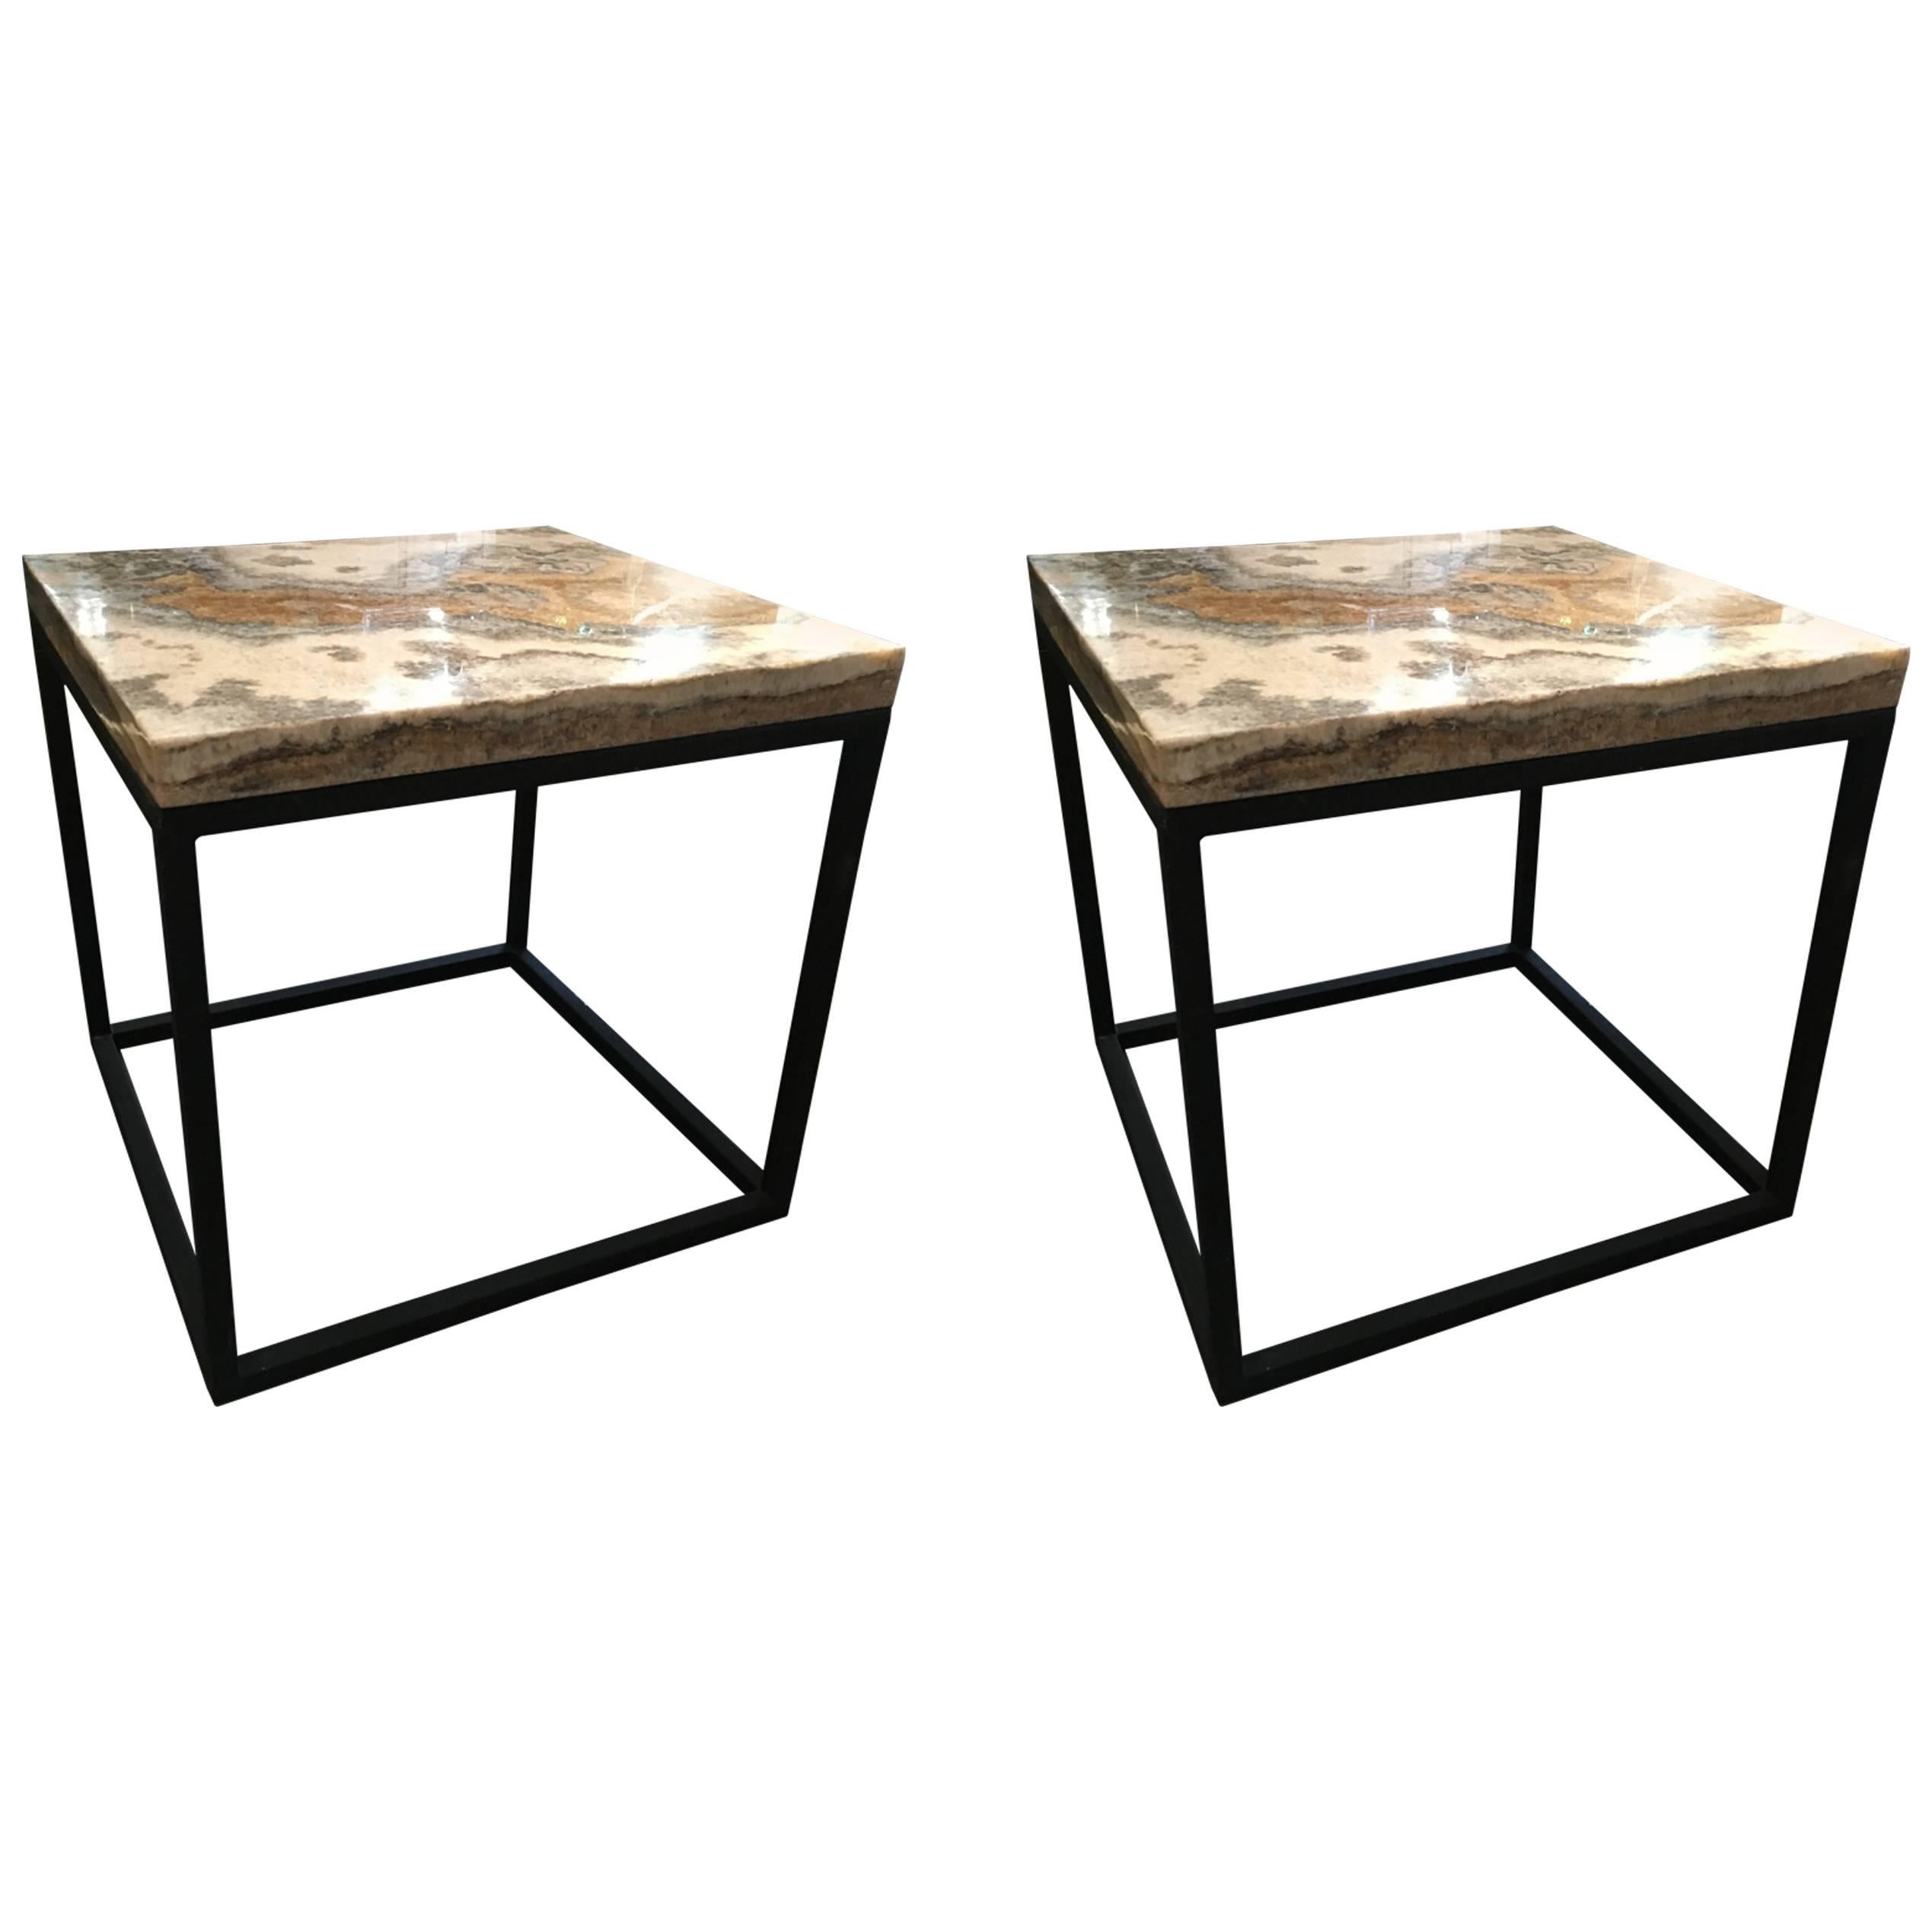 Pair of Marble-Top Square Side Tables